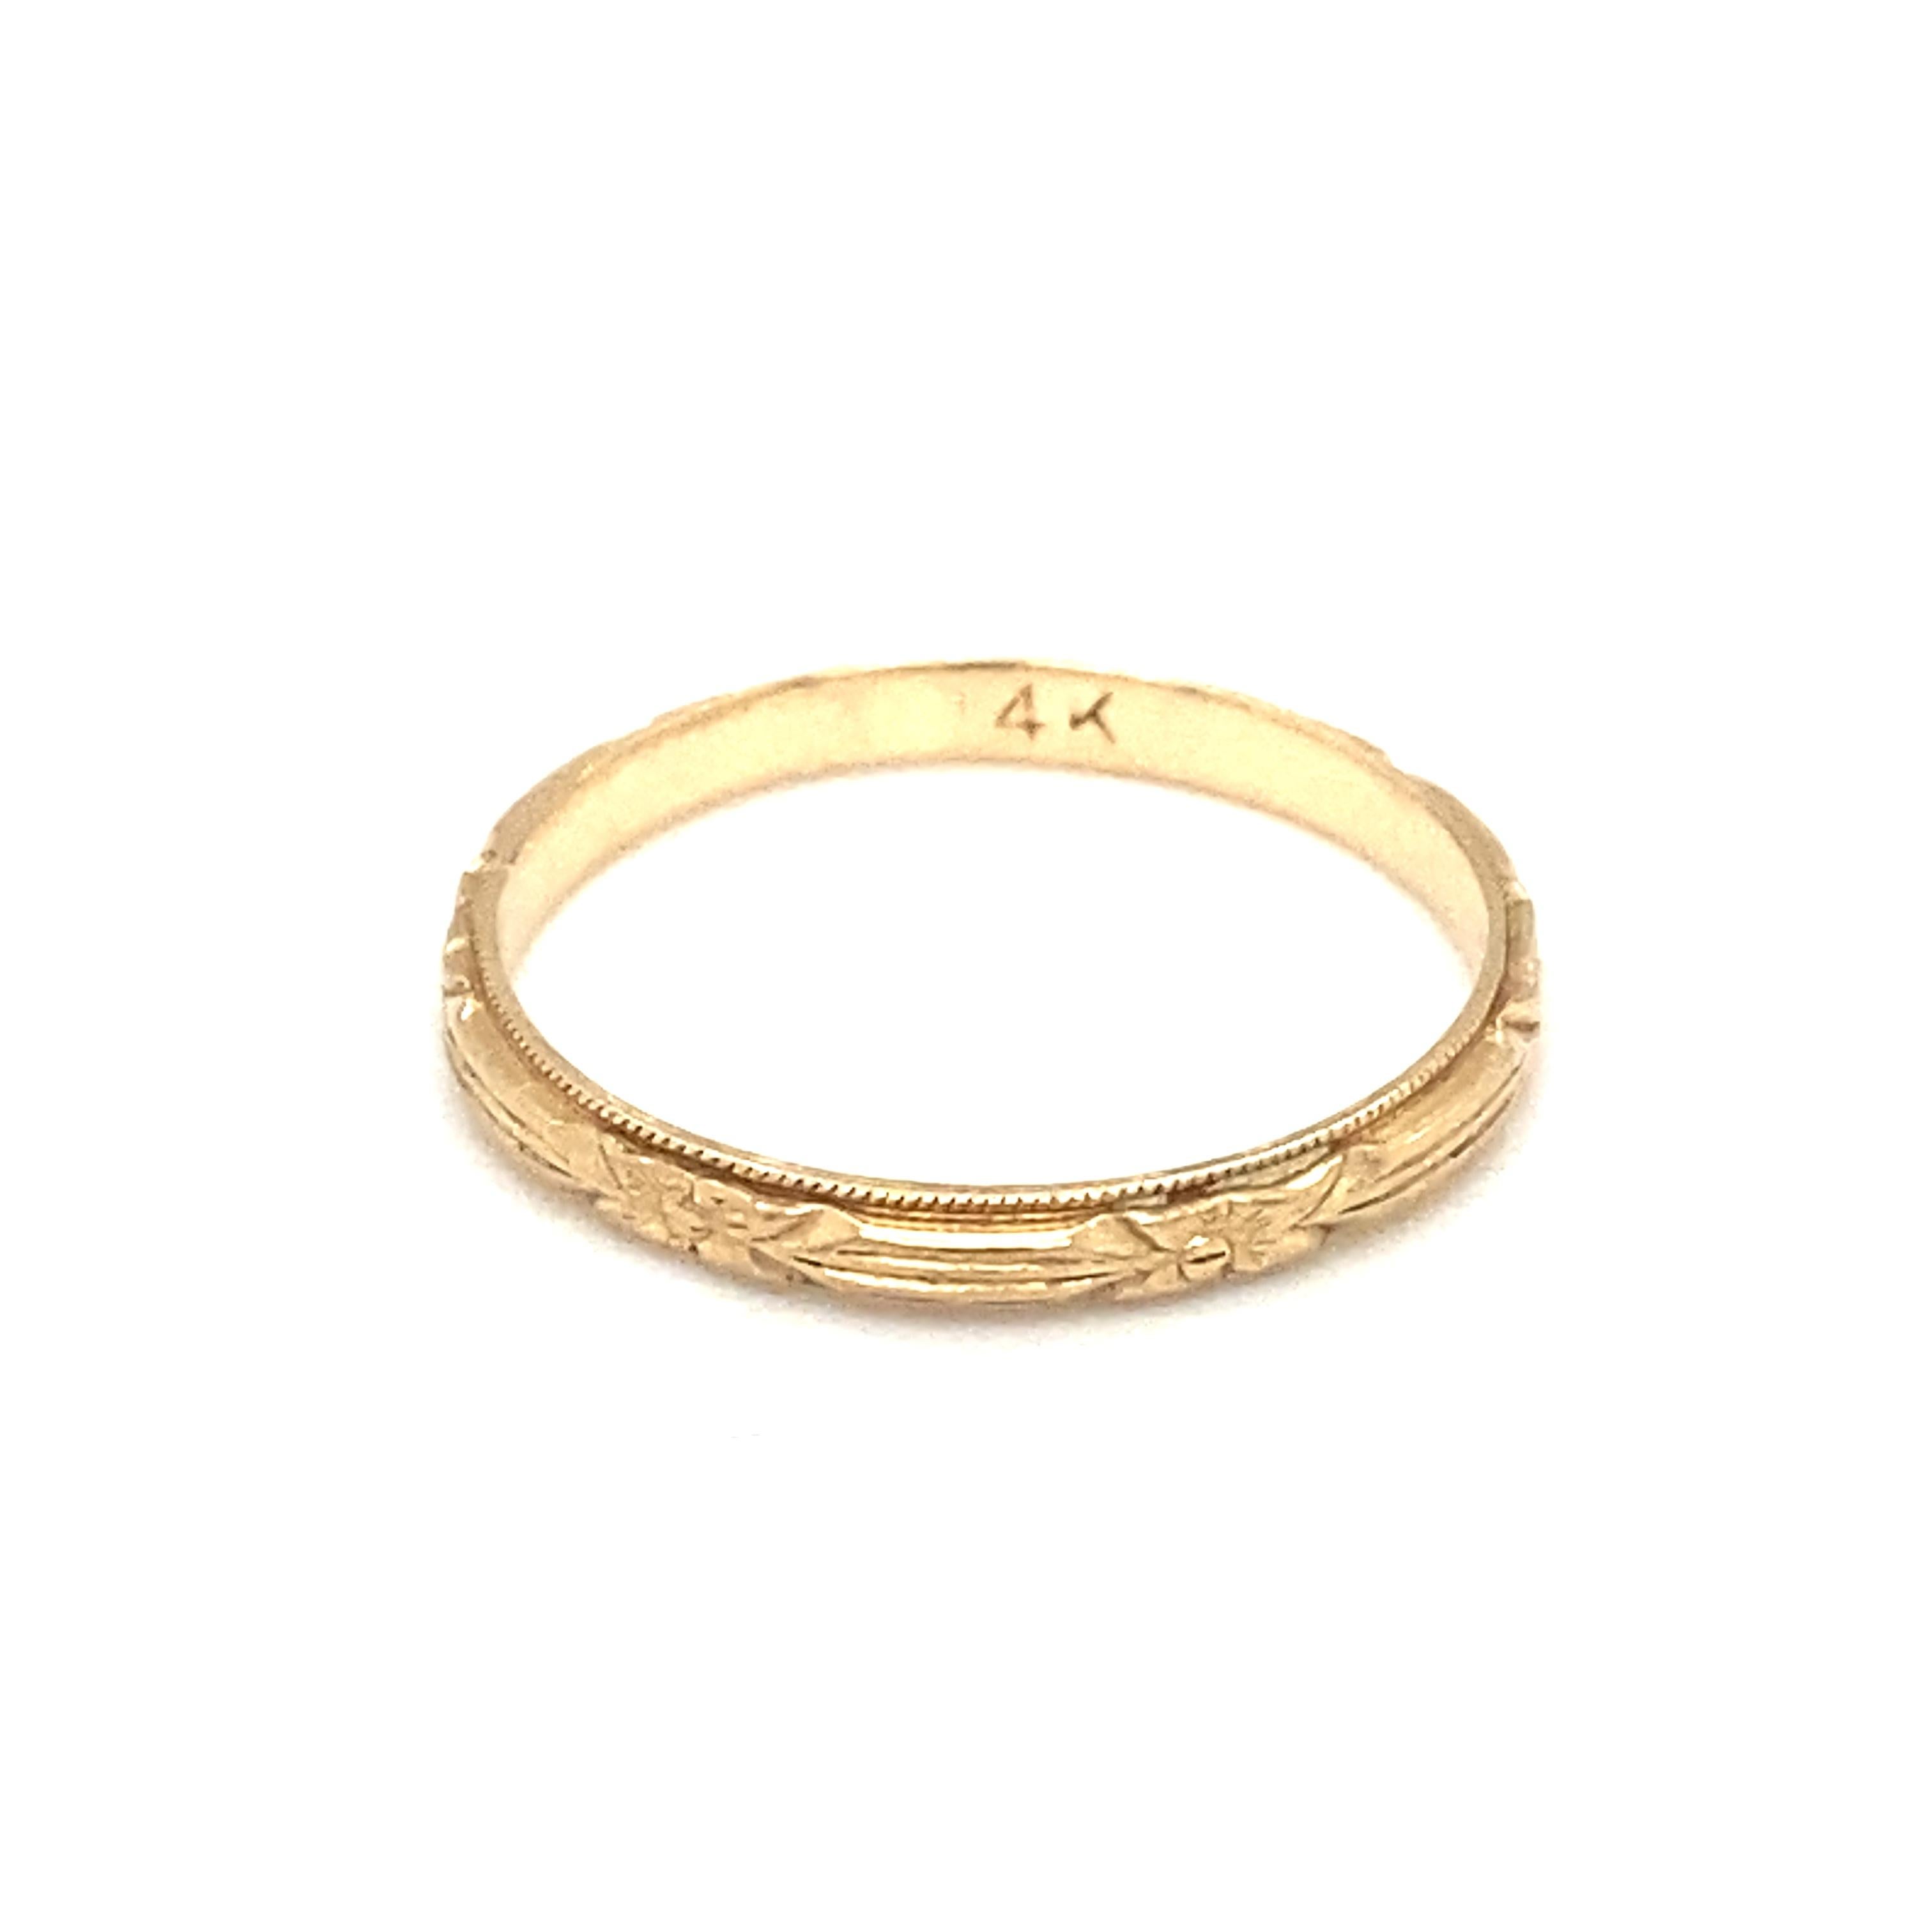 Circa 1920s Art Deco Floral Design Wedding Band in 14 Karat Yellow Gold For Sale 2